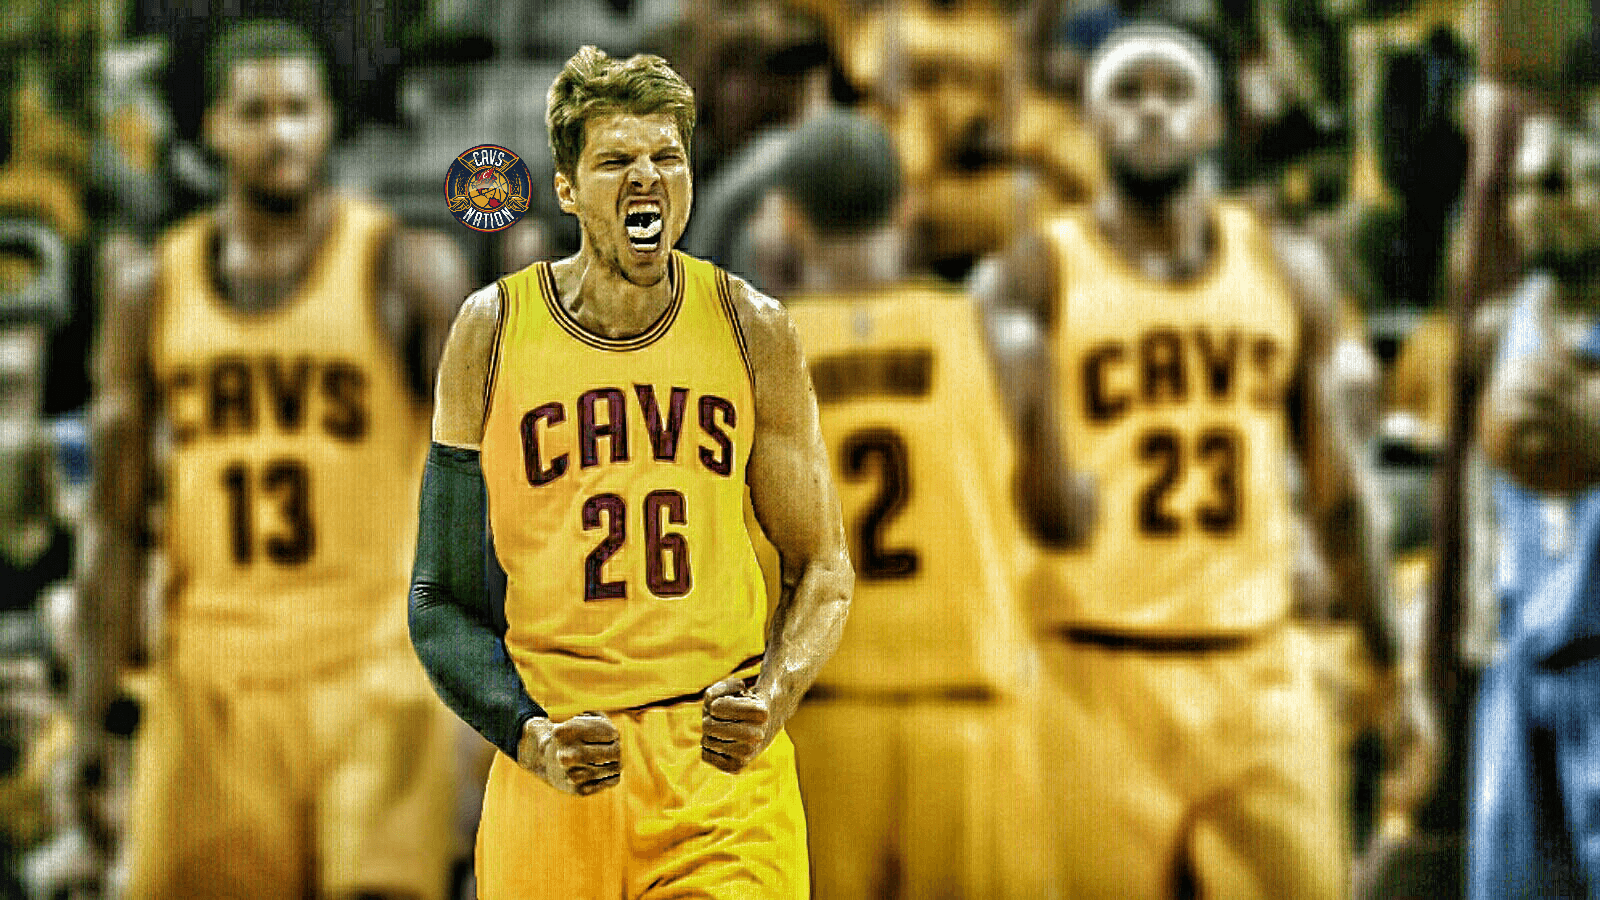 Breaking: Kyle Korver Has Reportedly Been Traded To The Cavaliers